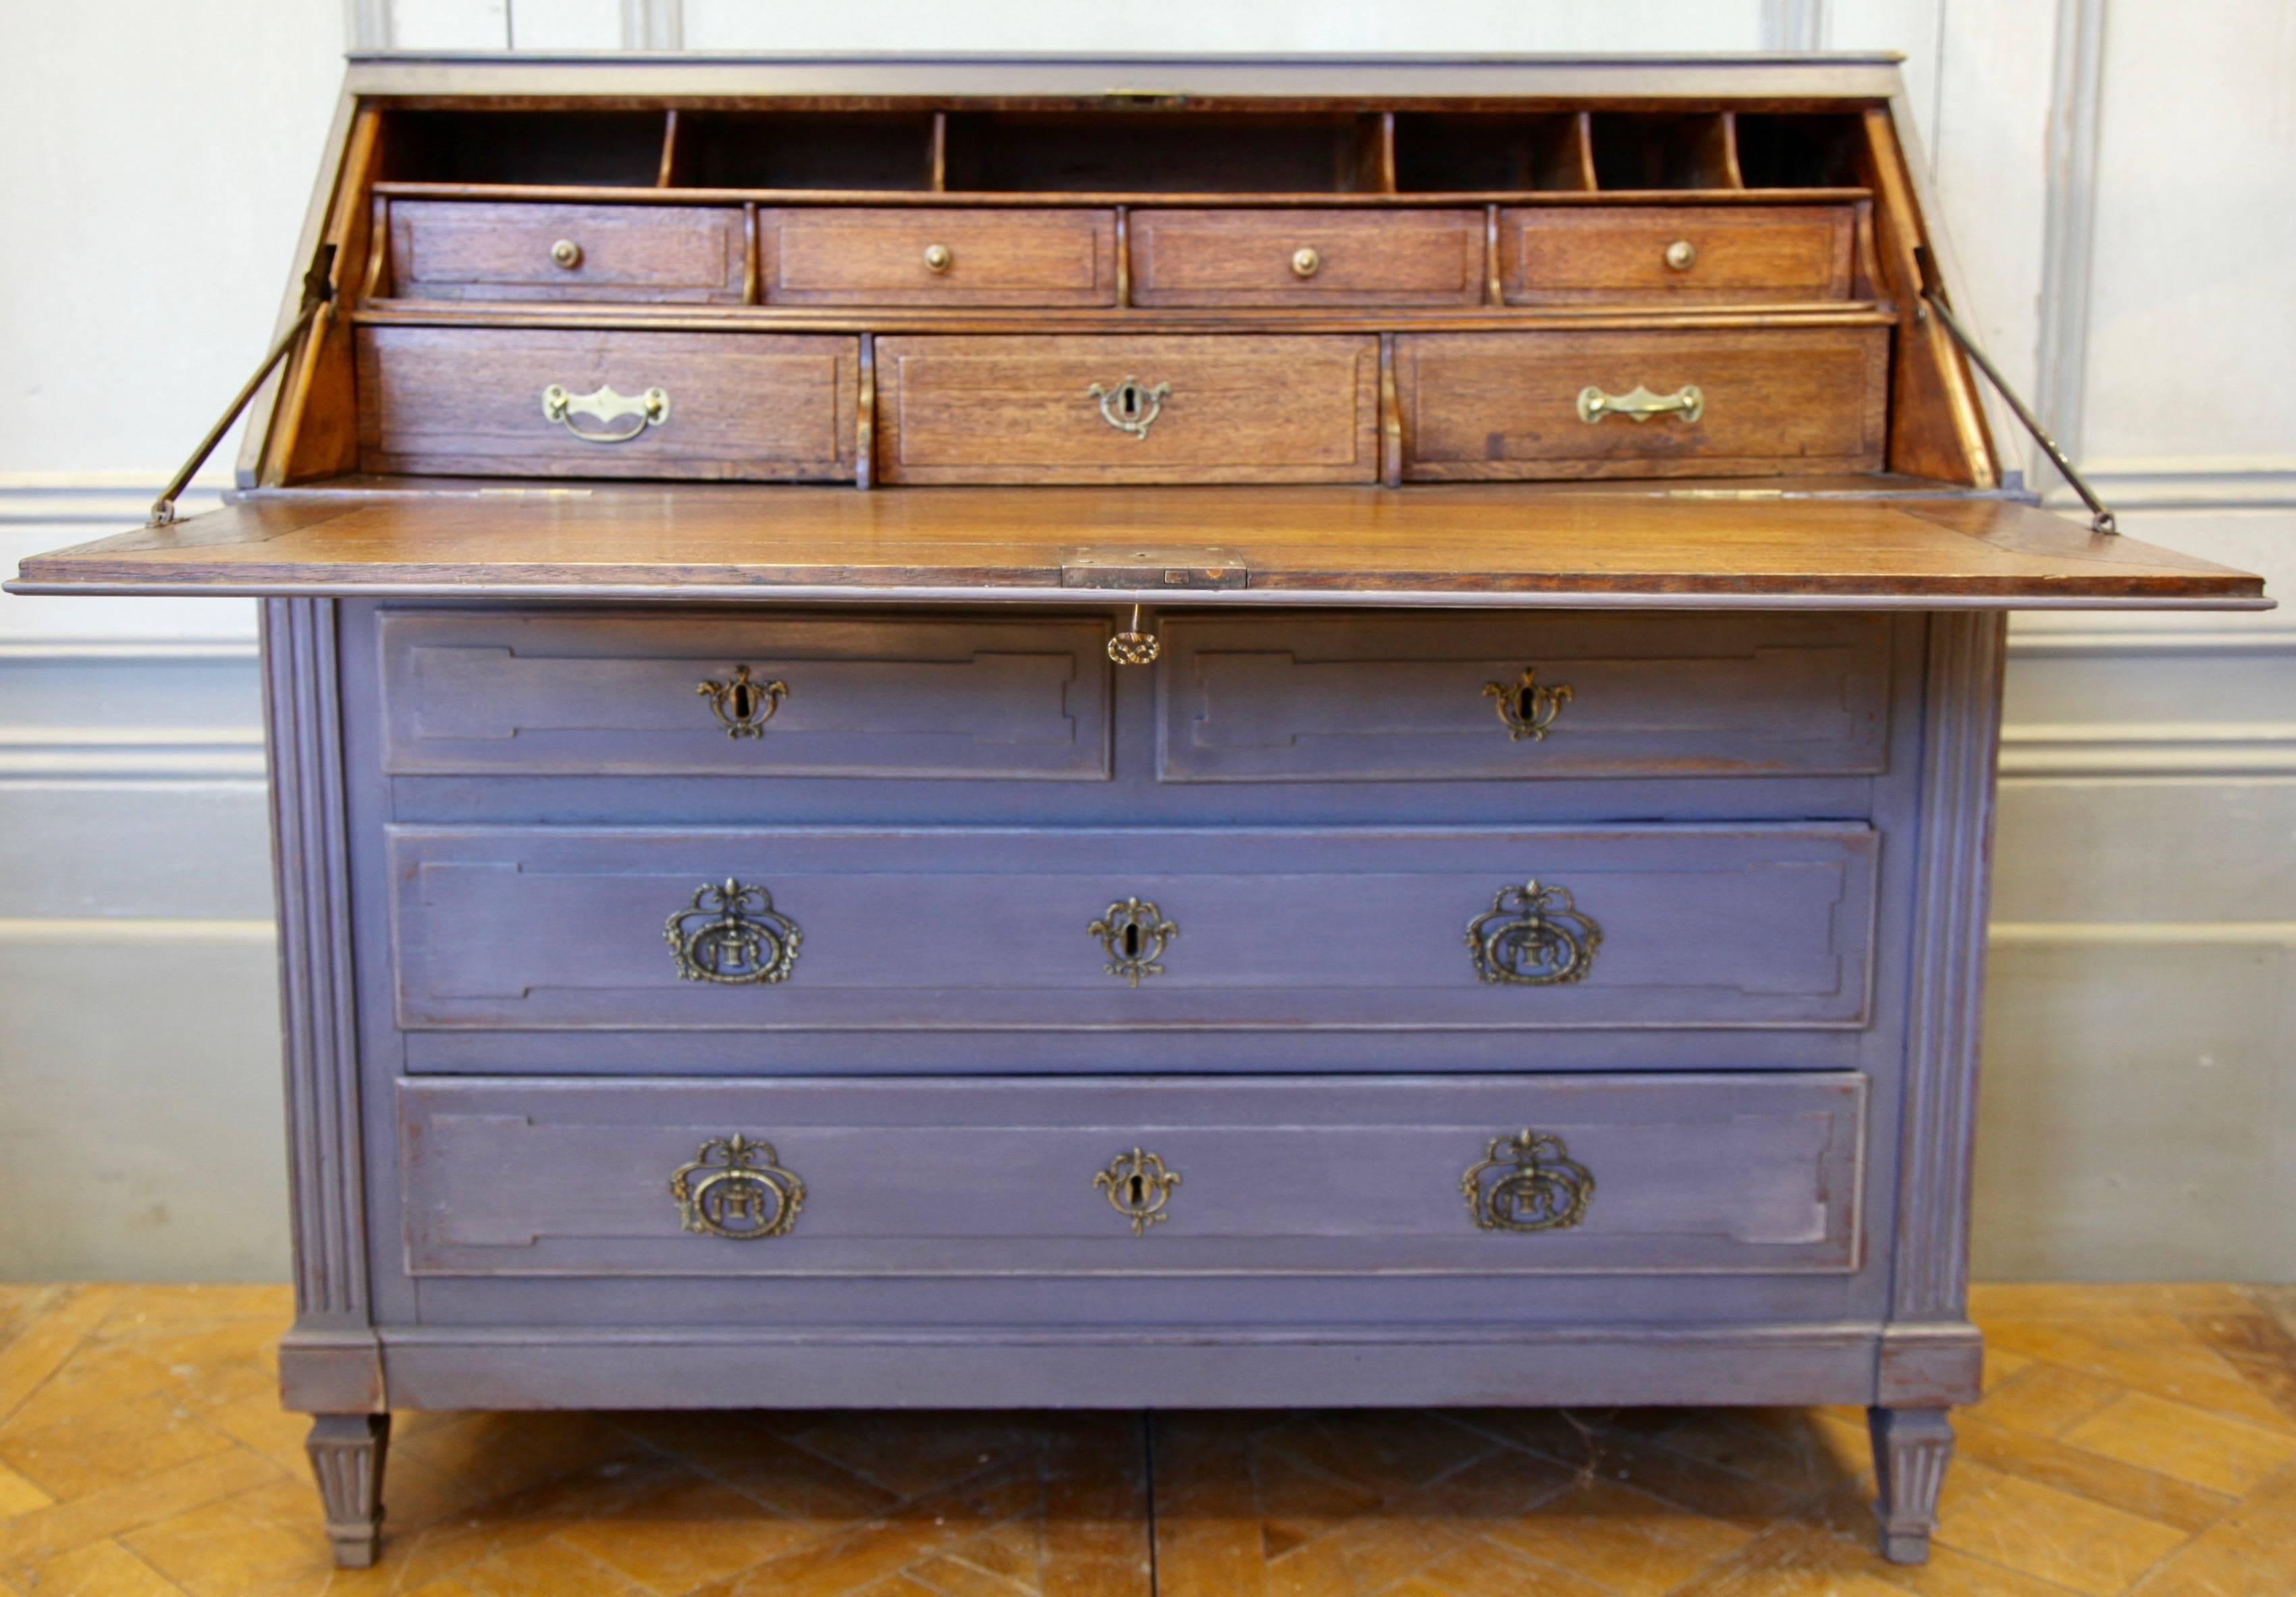 An elegant, beautifully made 18th century French Scribban in solid oakwood. The interior of the desk has a polished, natural, wood patina and the outside is finished in an age distressed paintwork. All the bronze work is original to the piece.